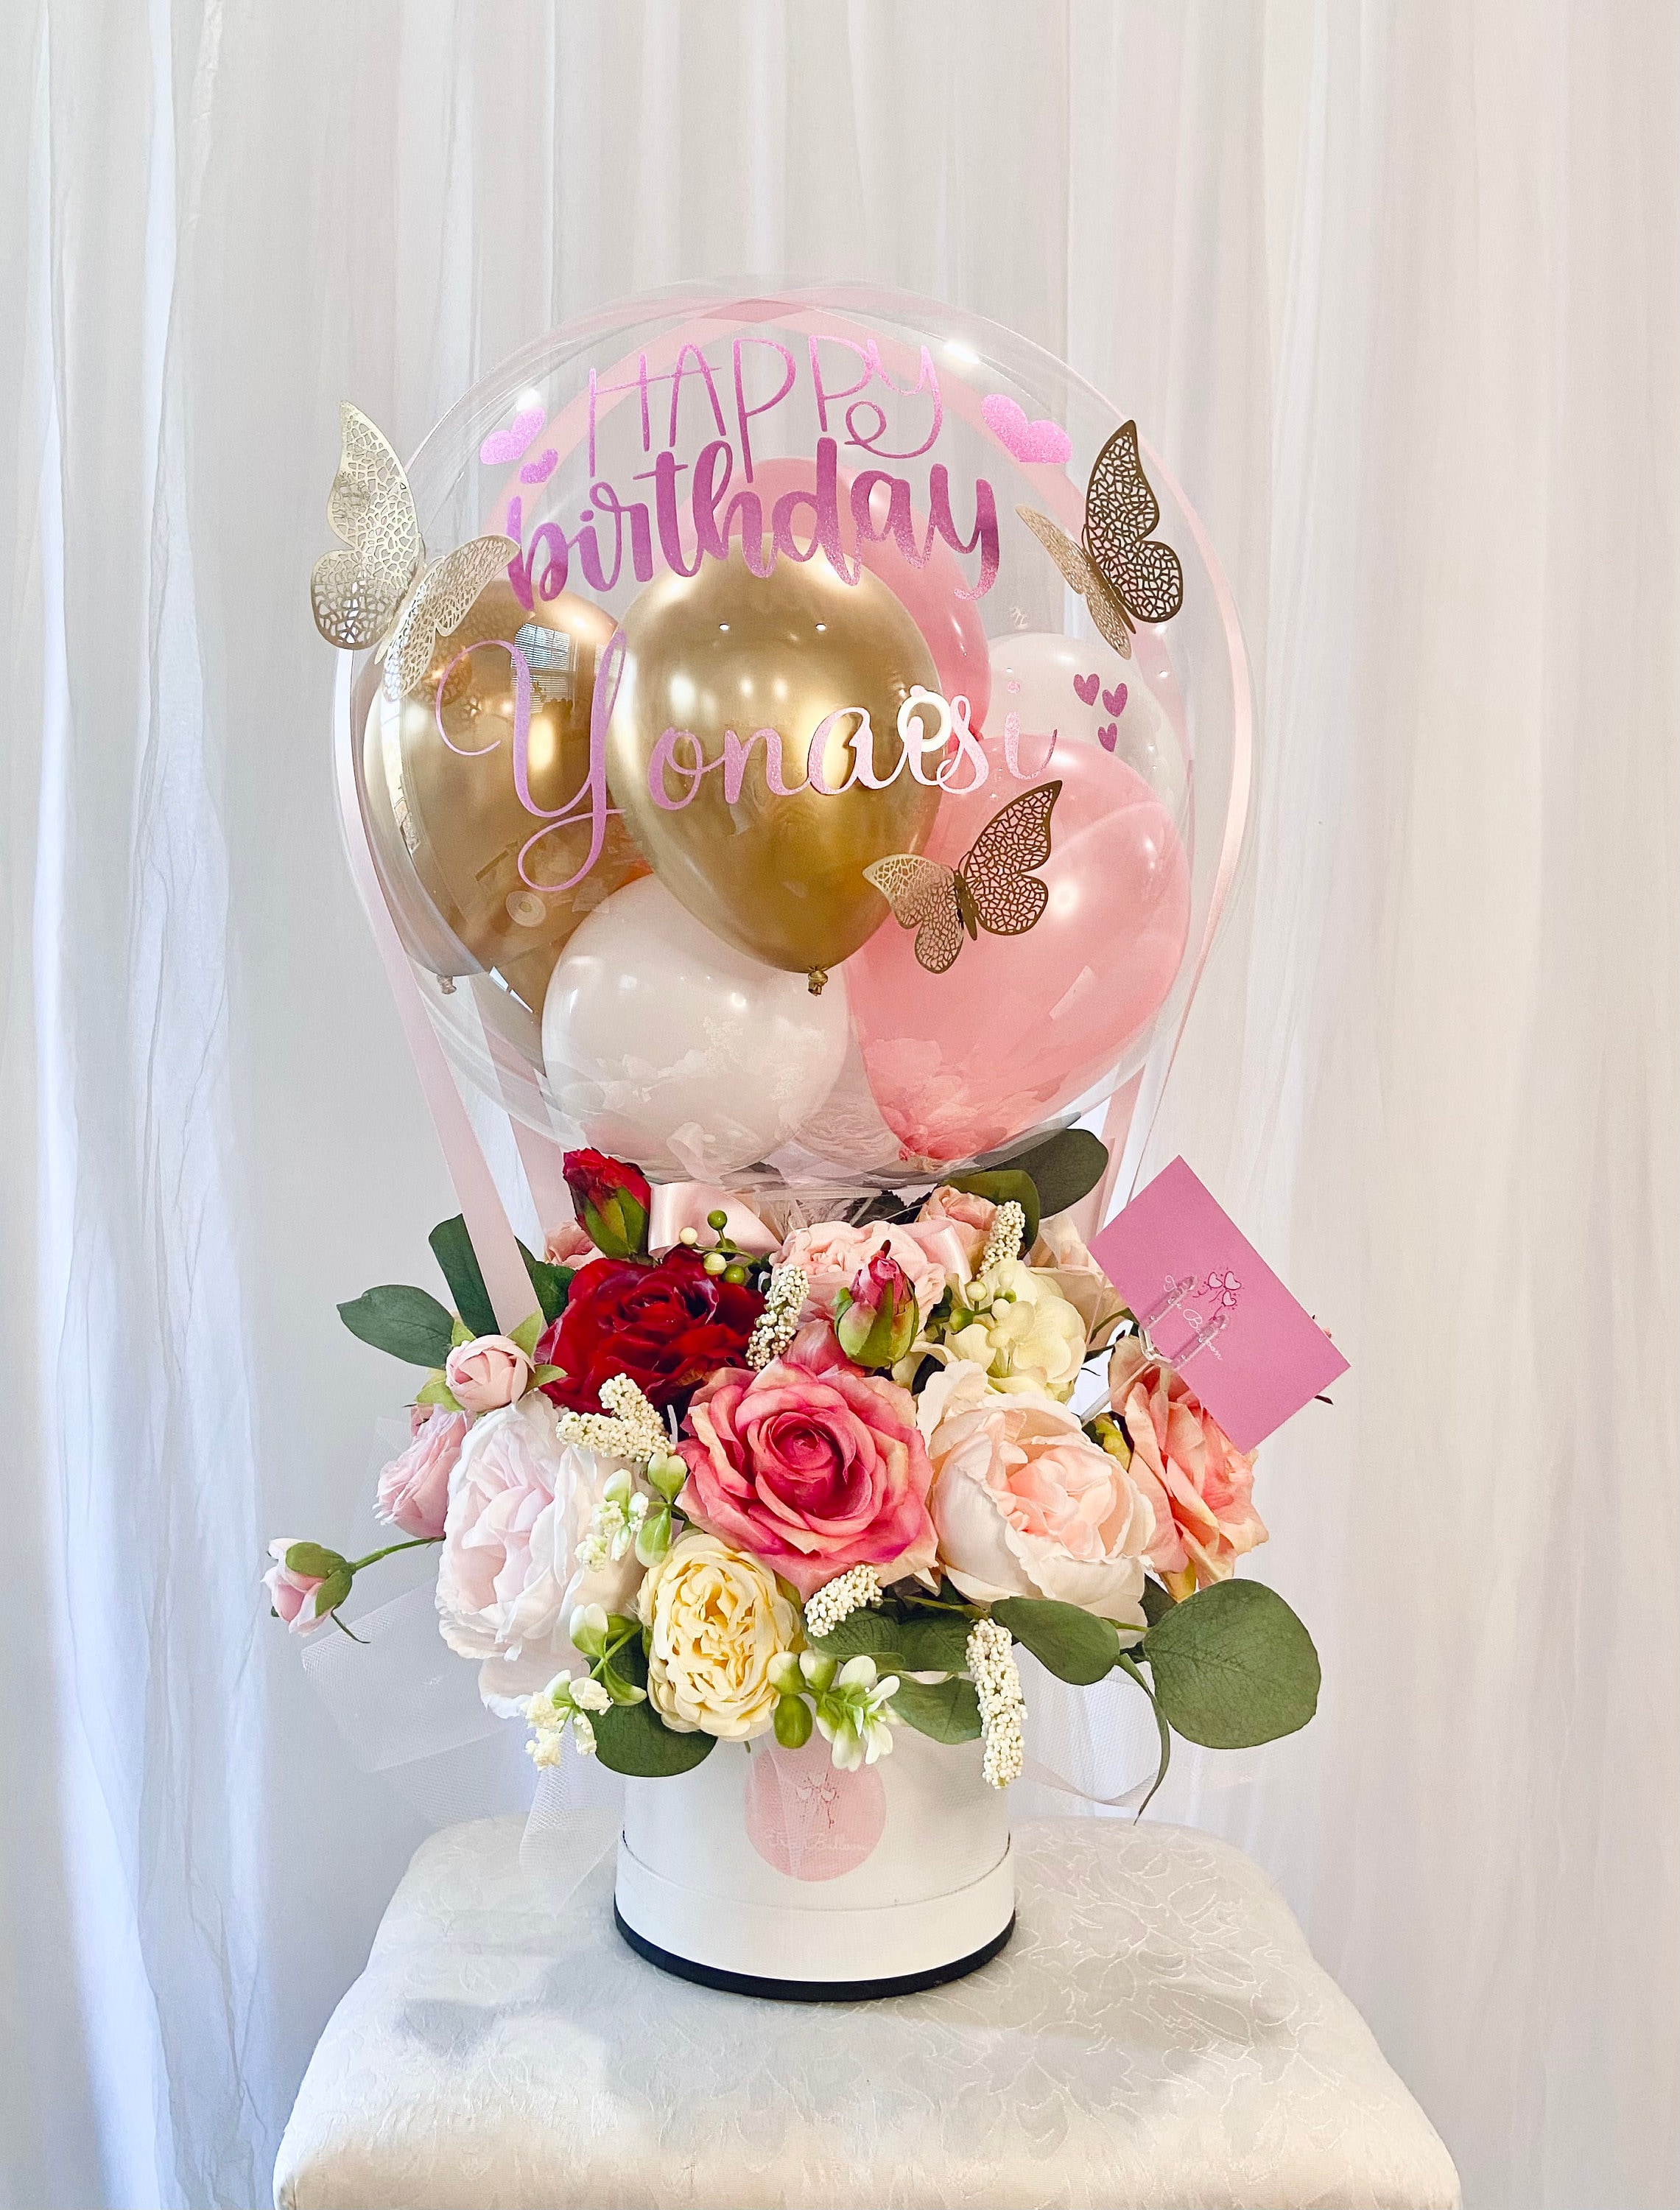 Balloon Flowers and Bouquets - Come To My Party